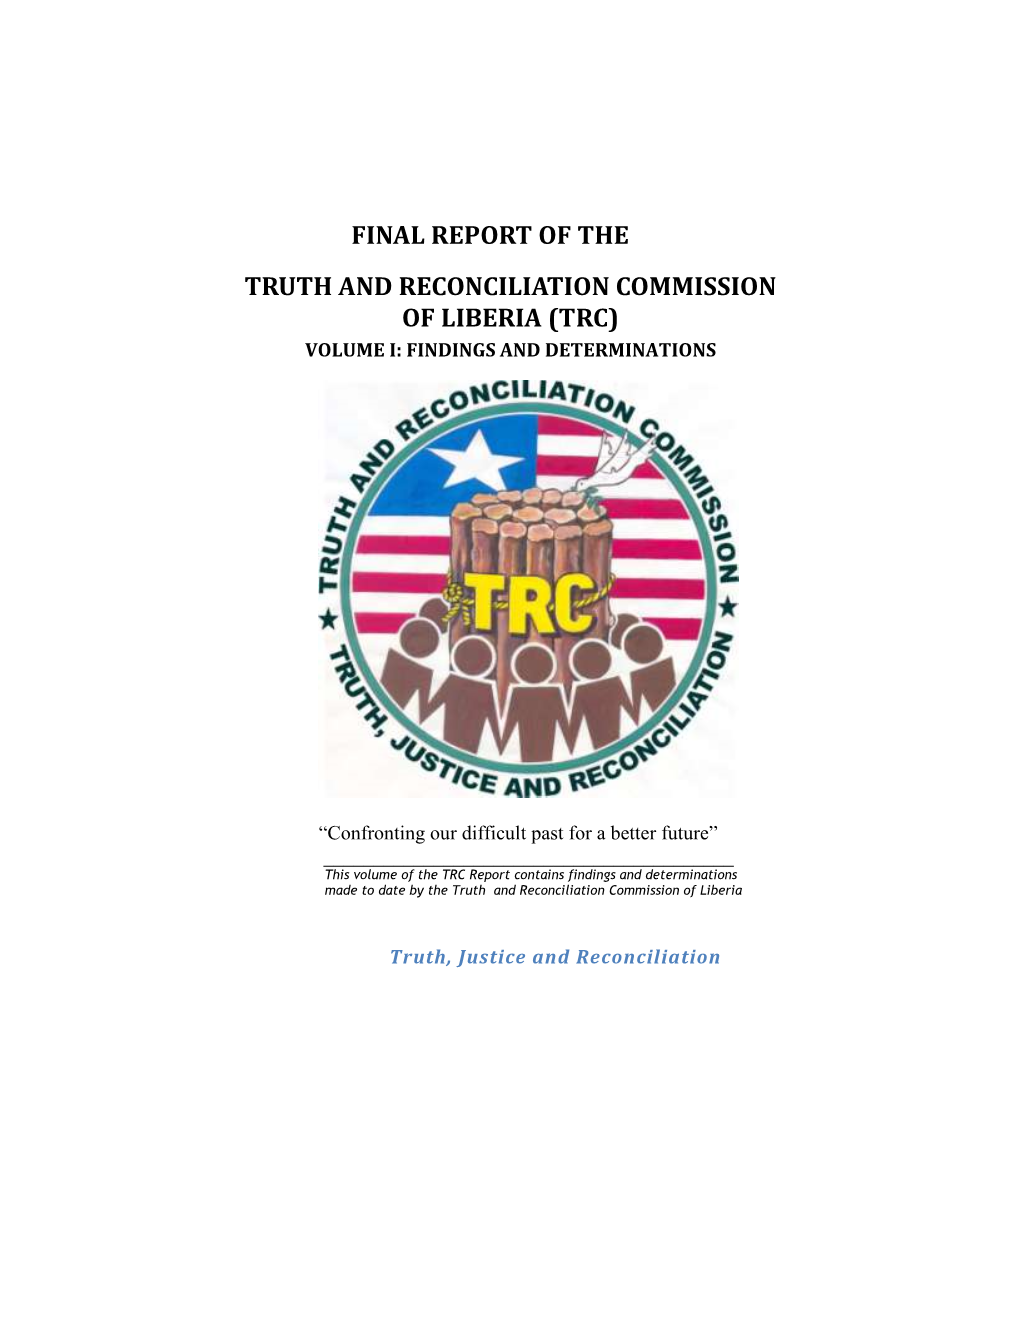 Final Report of the Truth and Reconciliation Commission of Liberia (Trc) Volume I: Findings and Determinations